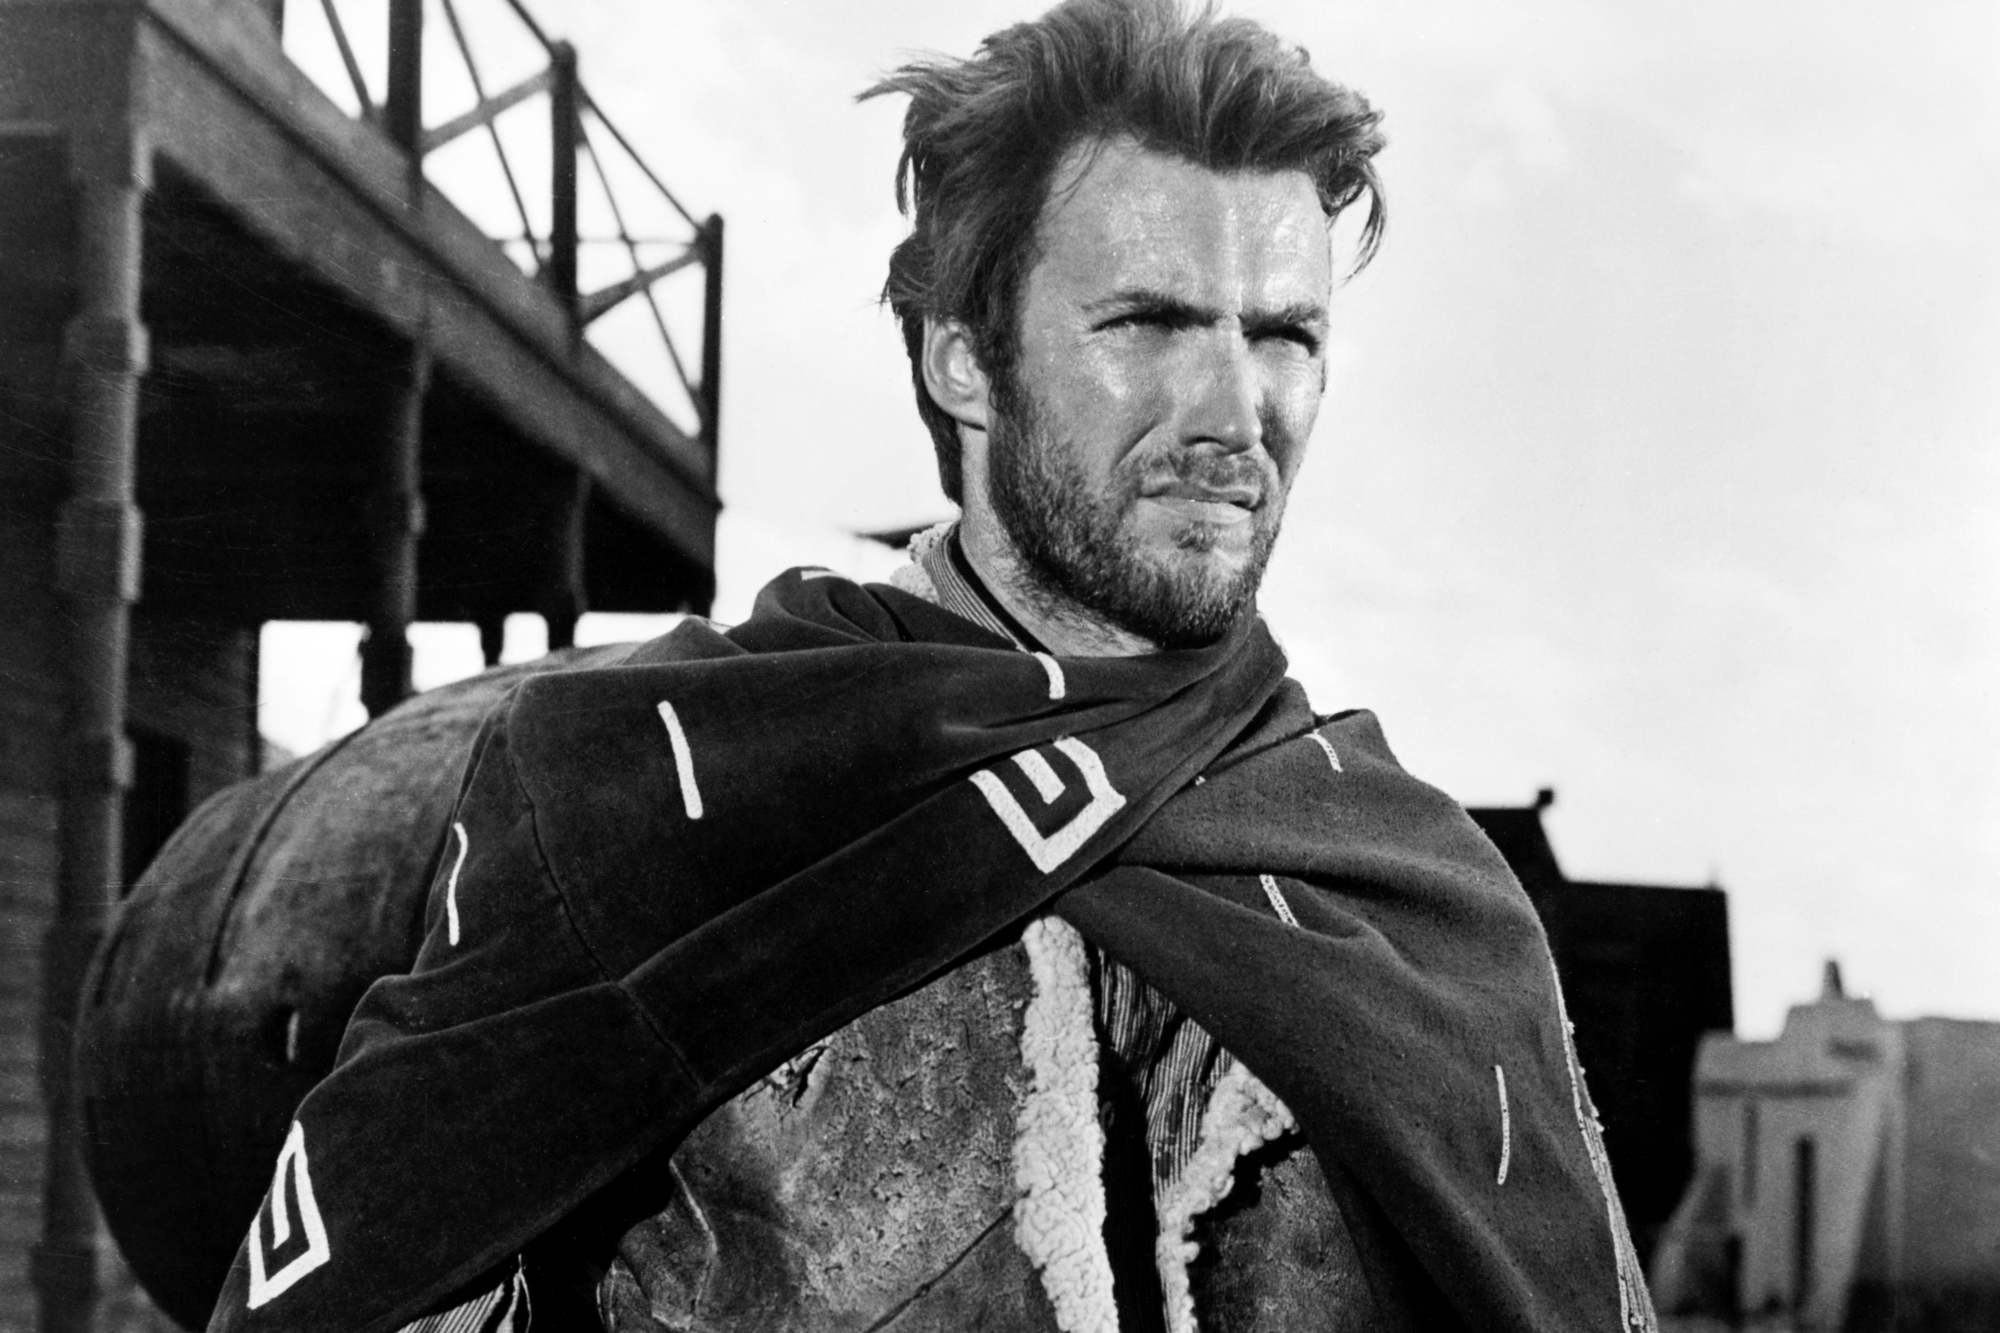 'A Fistful of Dollars' Clint Eastwood as Joe in a black-and-white picture wearing a poncho and squinting